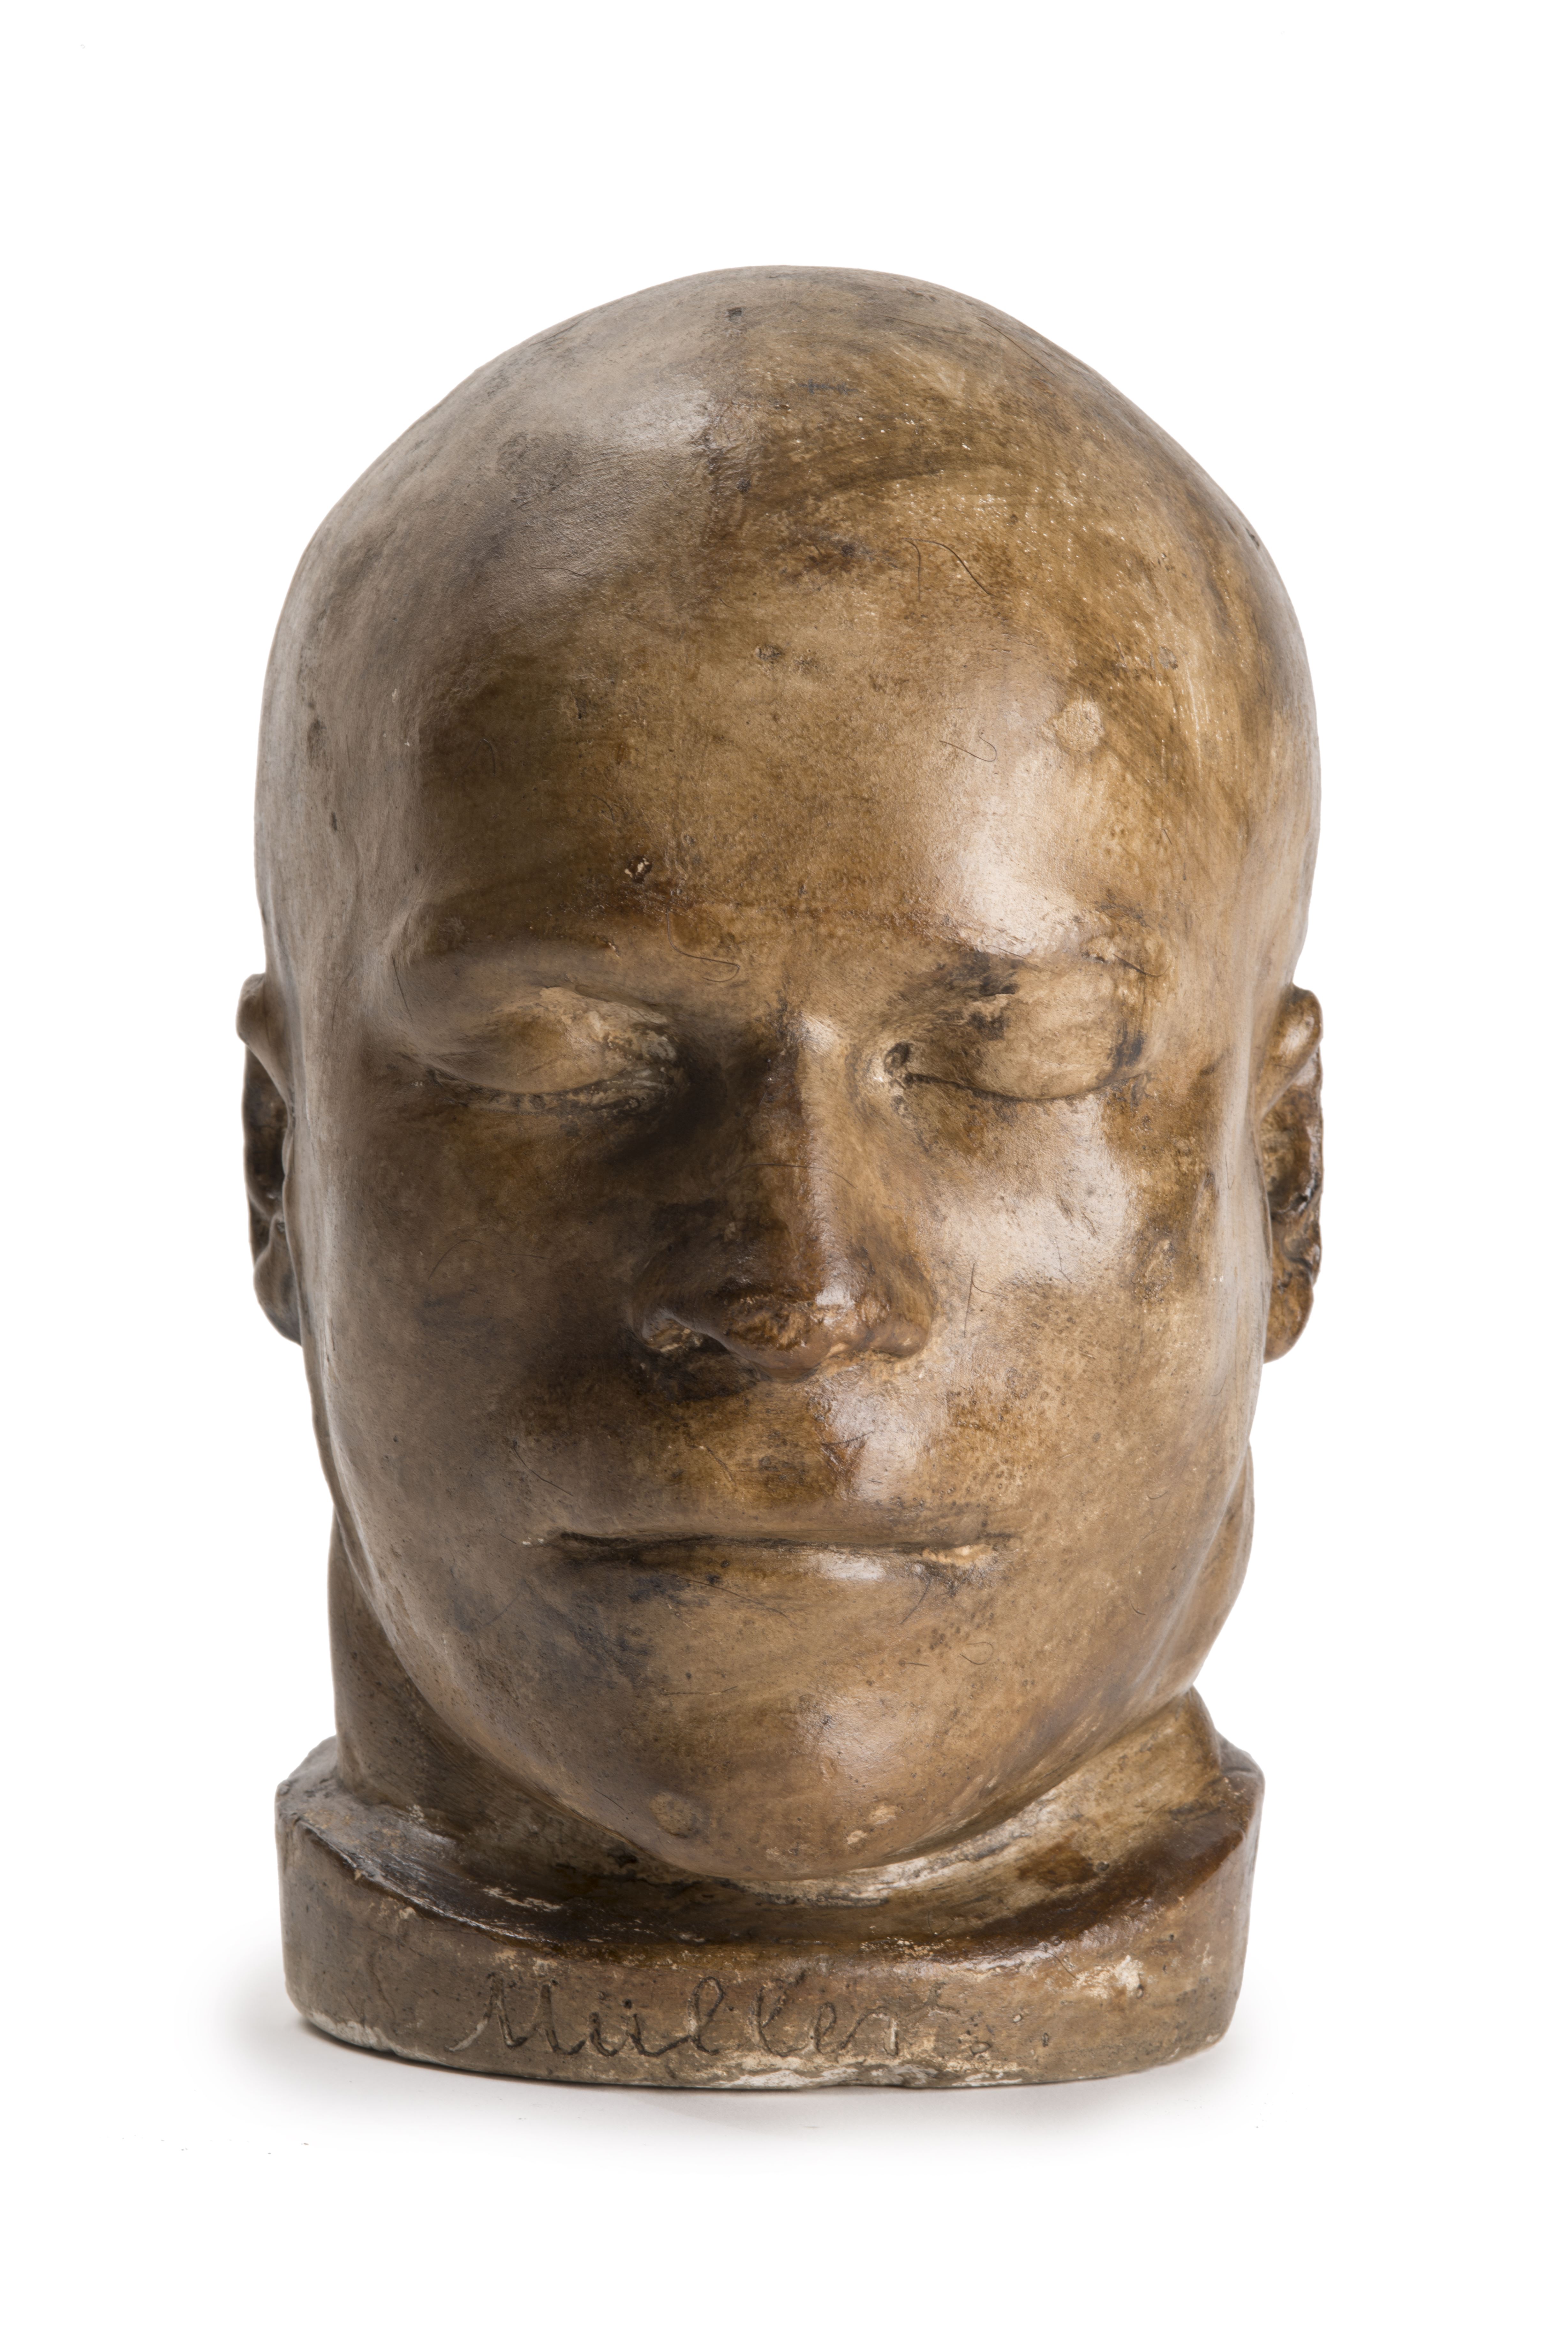 19. Death mask of Franz Muller, a German tailor who committed the first British railway murder, 1864 ∏ Museum of London